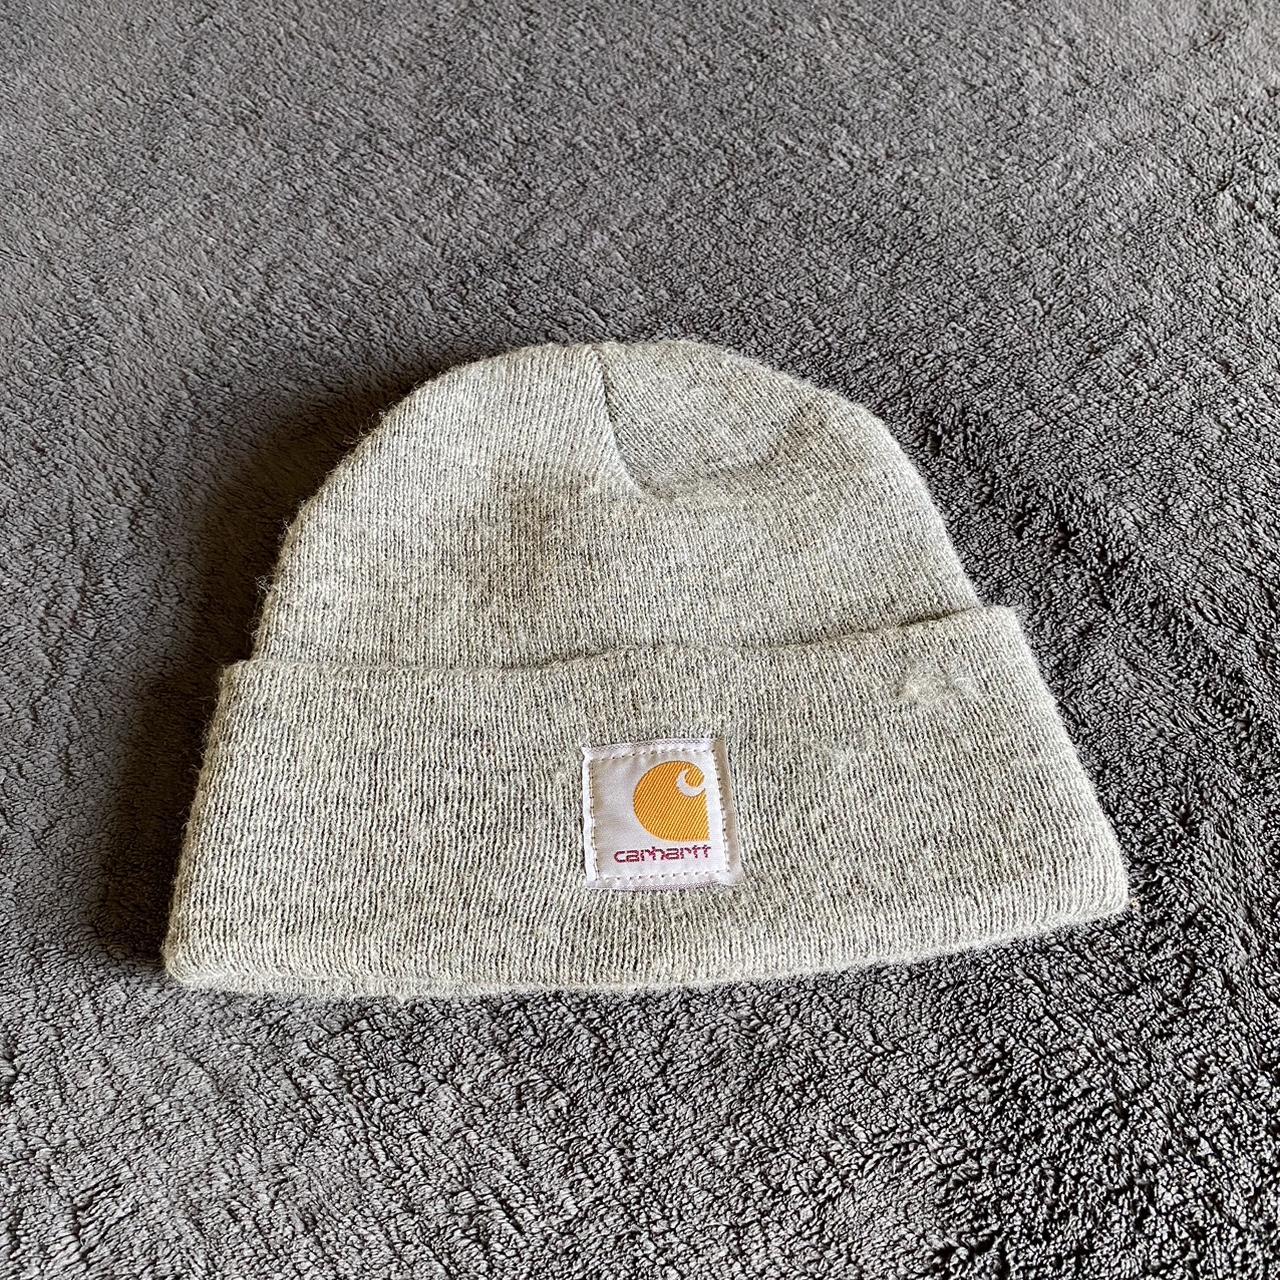 CARHARTT BEANIE Color - Grey Size - One Size Fits All - Depop